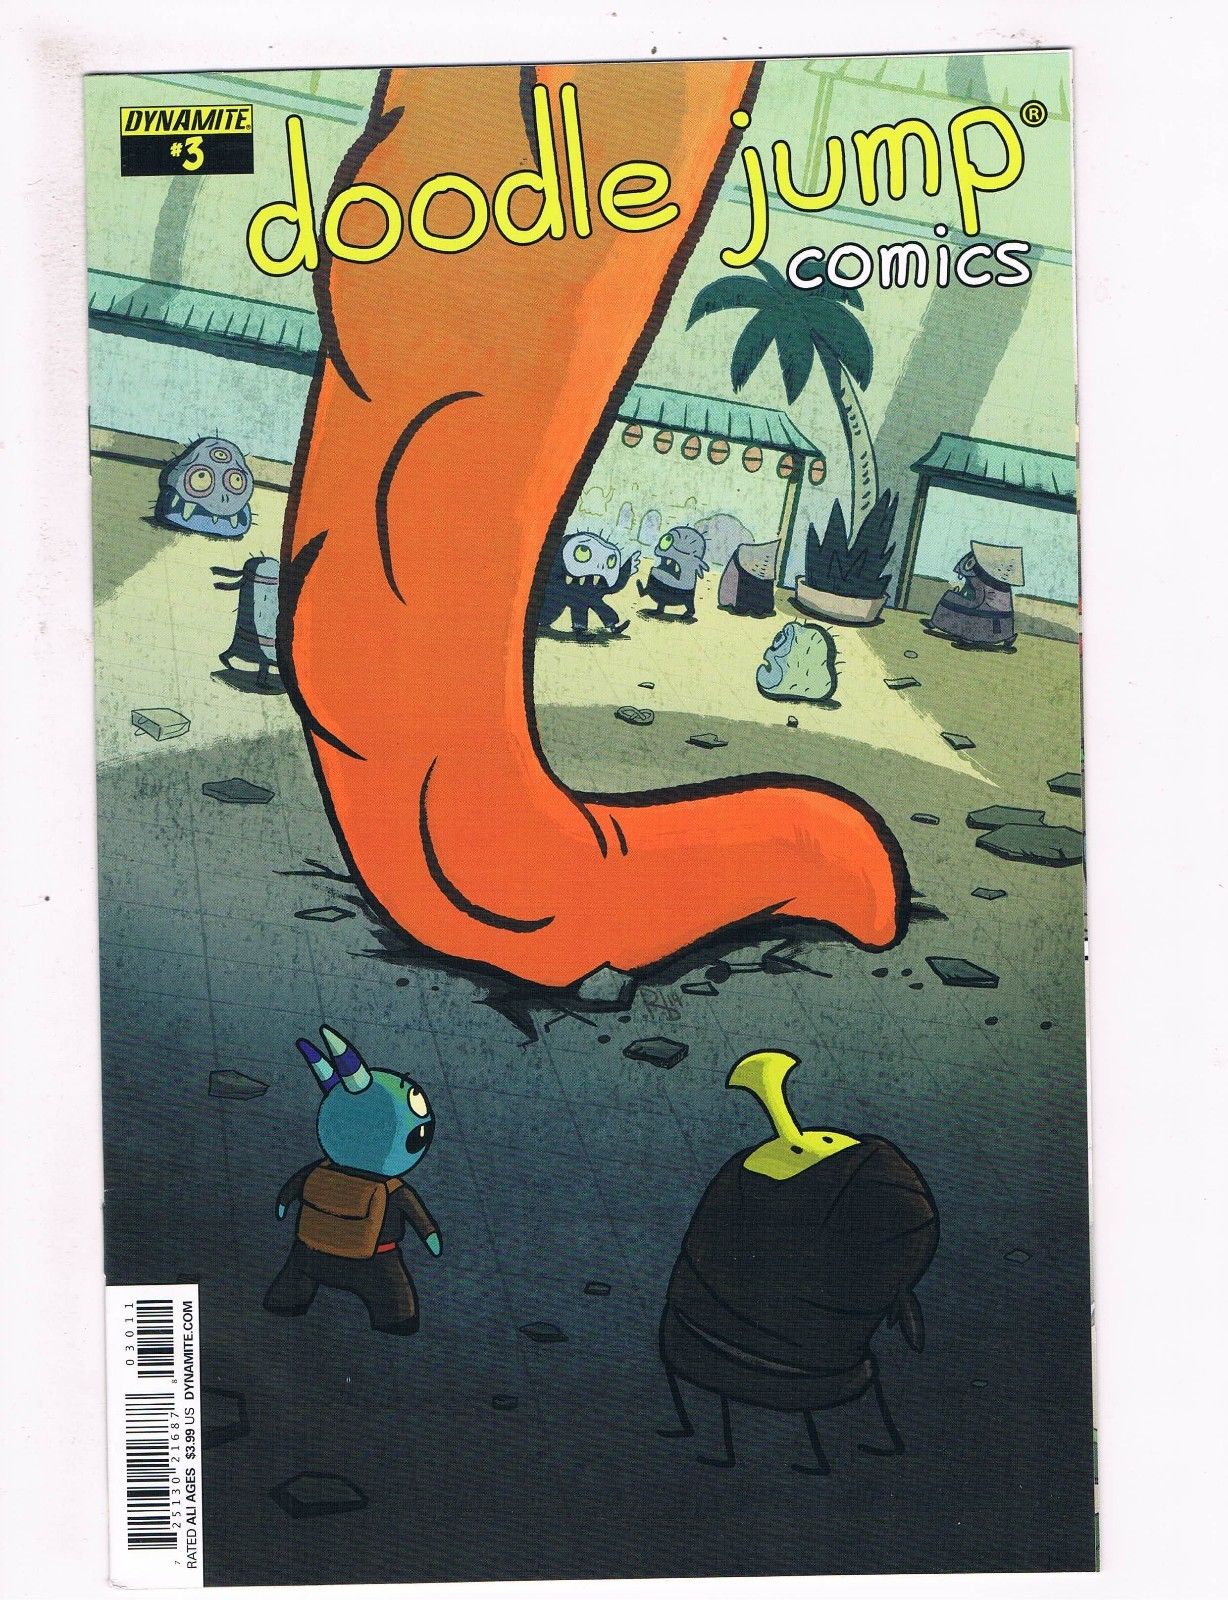 NYCC'13: Dynamite and Lima Sky Team for Doodle Jump Comic Book — Major  Spoilers — Comic Book Reviews, News, Previews, and Podcasts